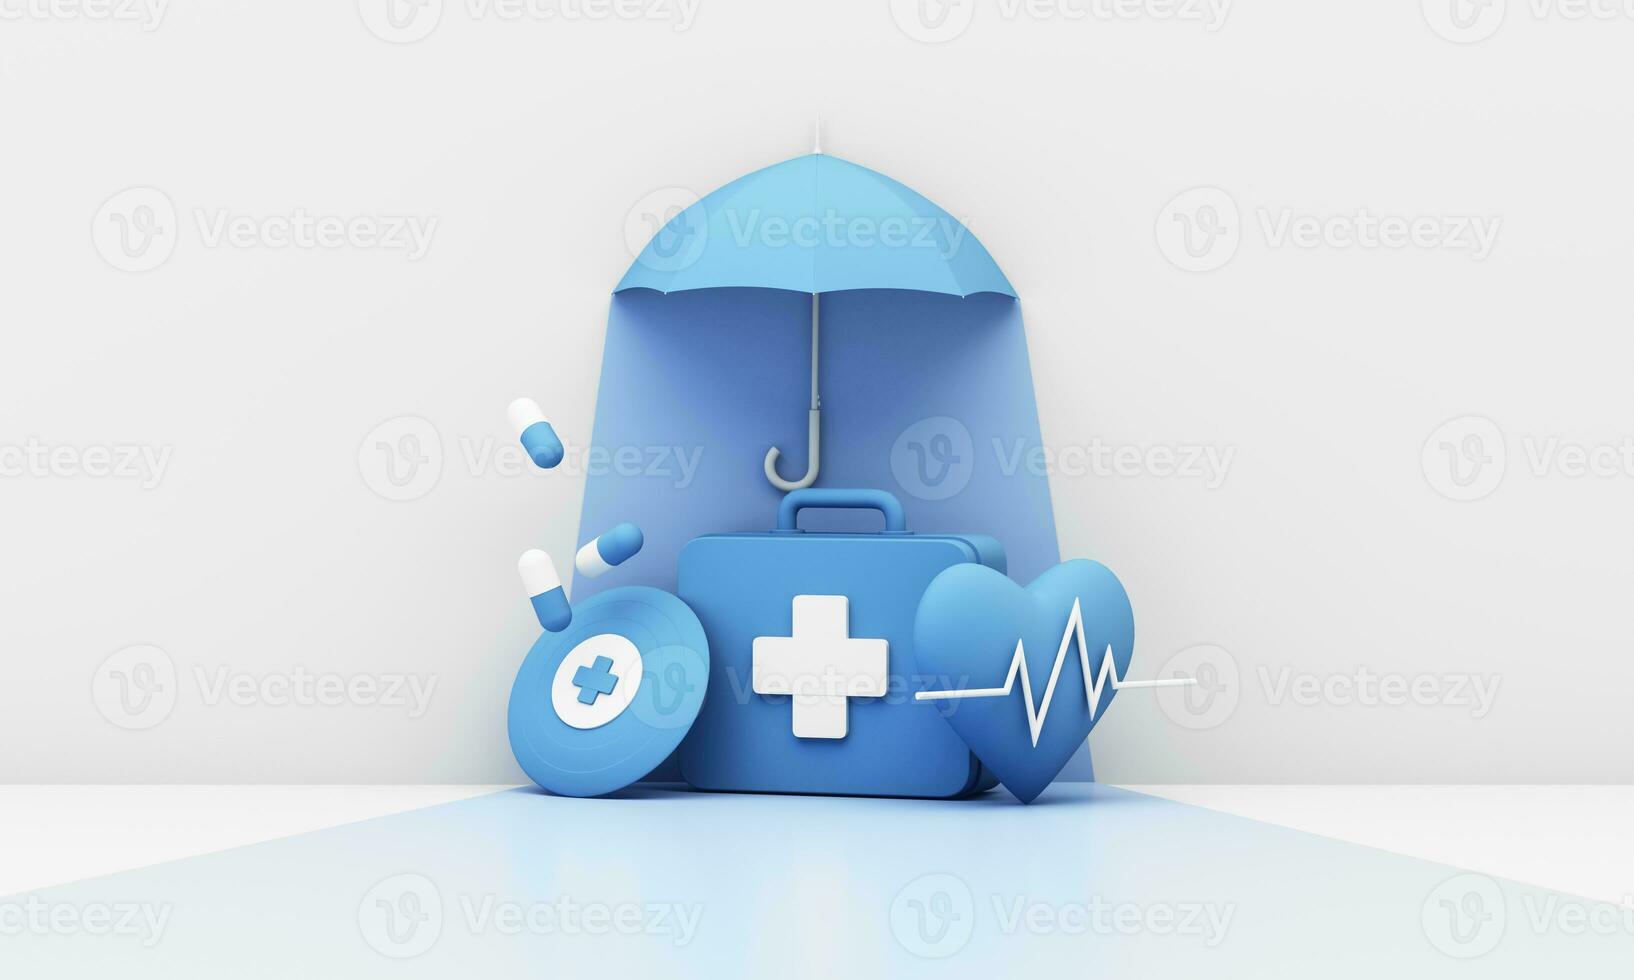 Image design, 3d rendering, background for concepts used in insurance, health and medical advertisements. in blue tones consisting of a medical box and an umbrella photo